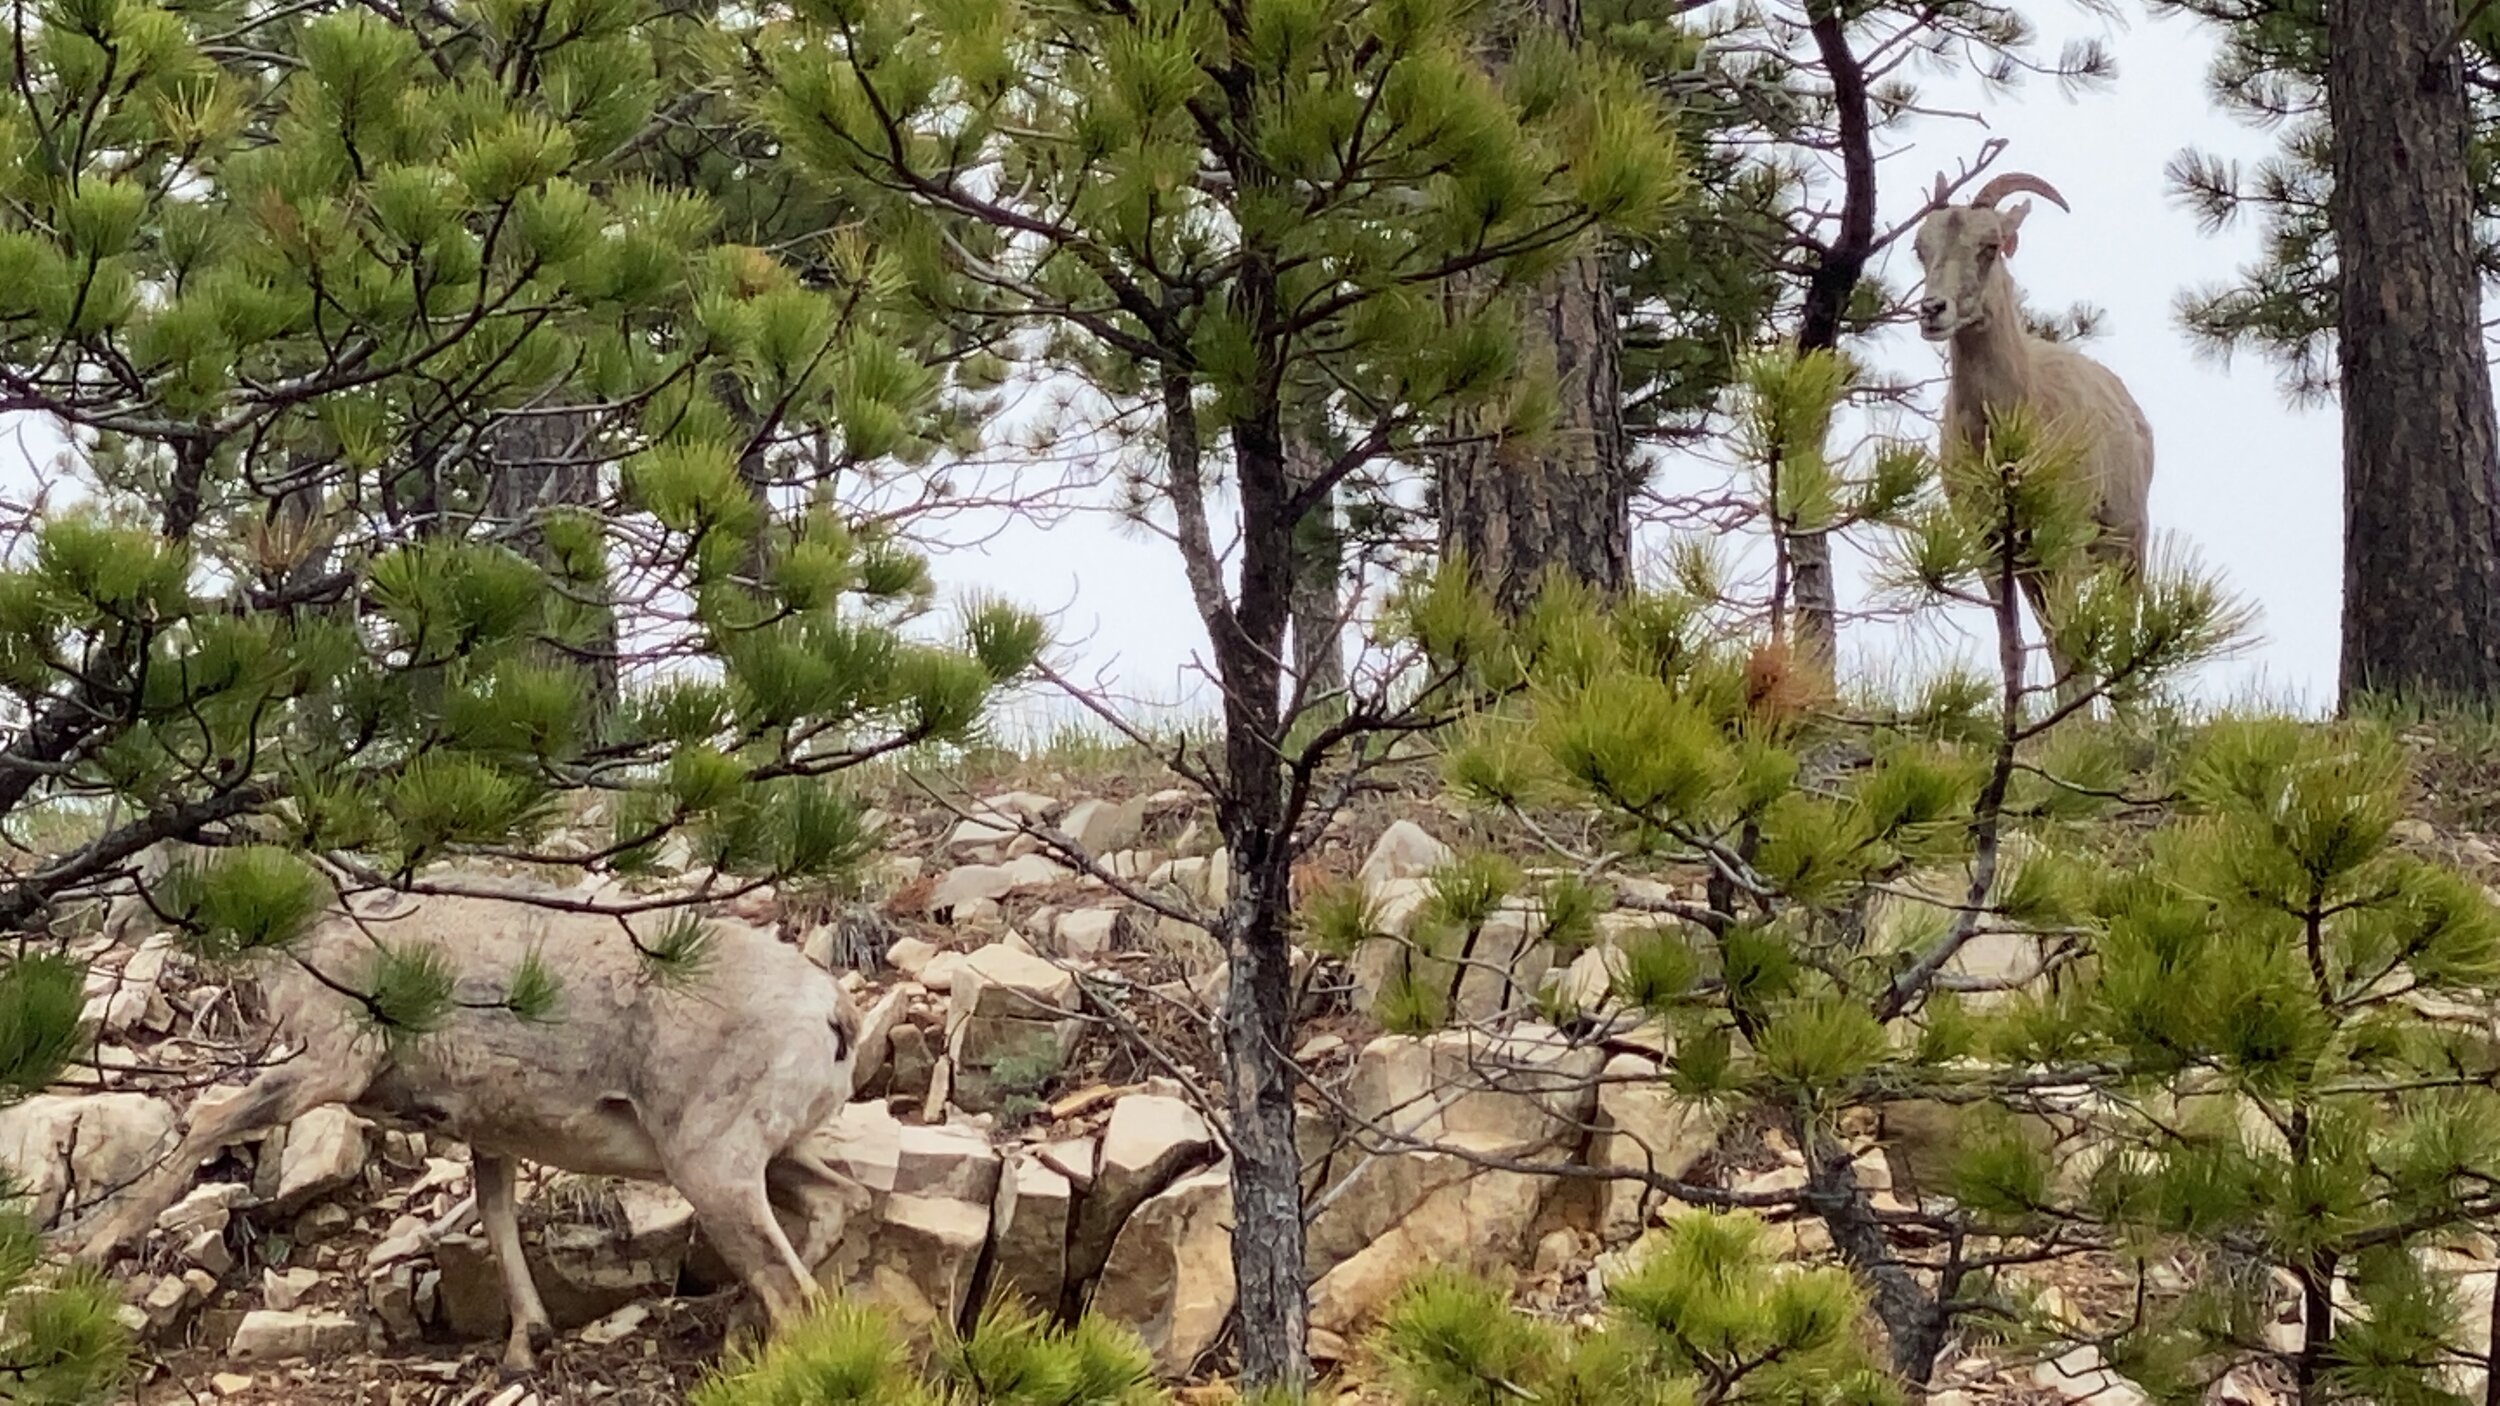 One big horn ewe waits for her friend to climb up and join her.  Black Hills National Forest.  Photo by Karen Boudreaux, May 28, 2021